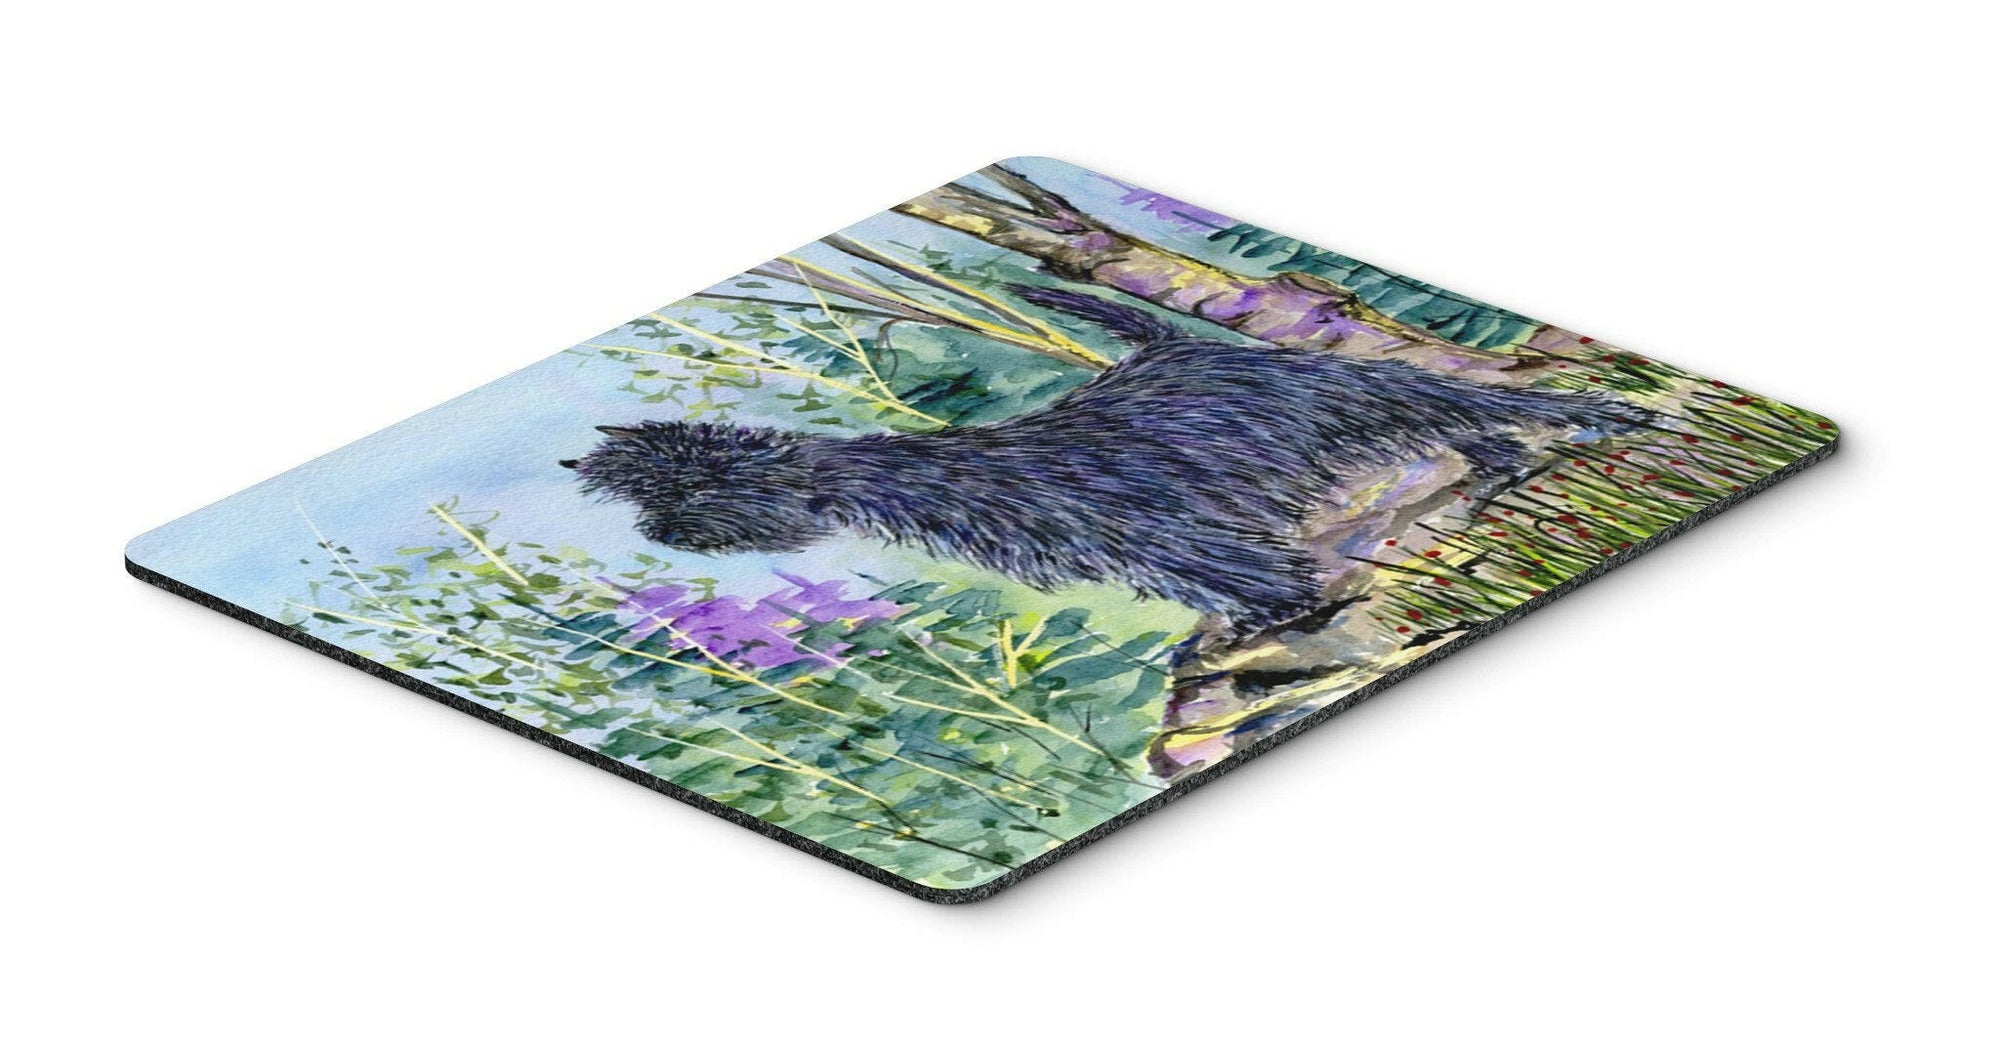 Cairn Terrier Mouse pad, hot pad, or trivet by Caroline's Treasures